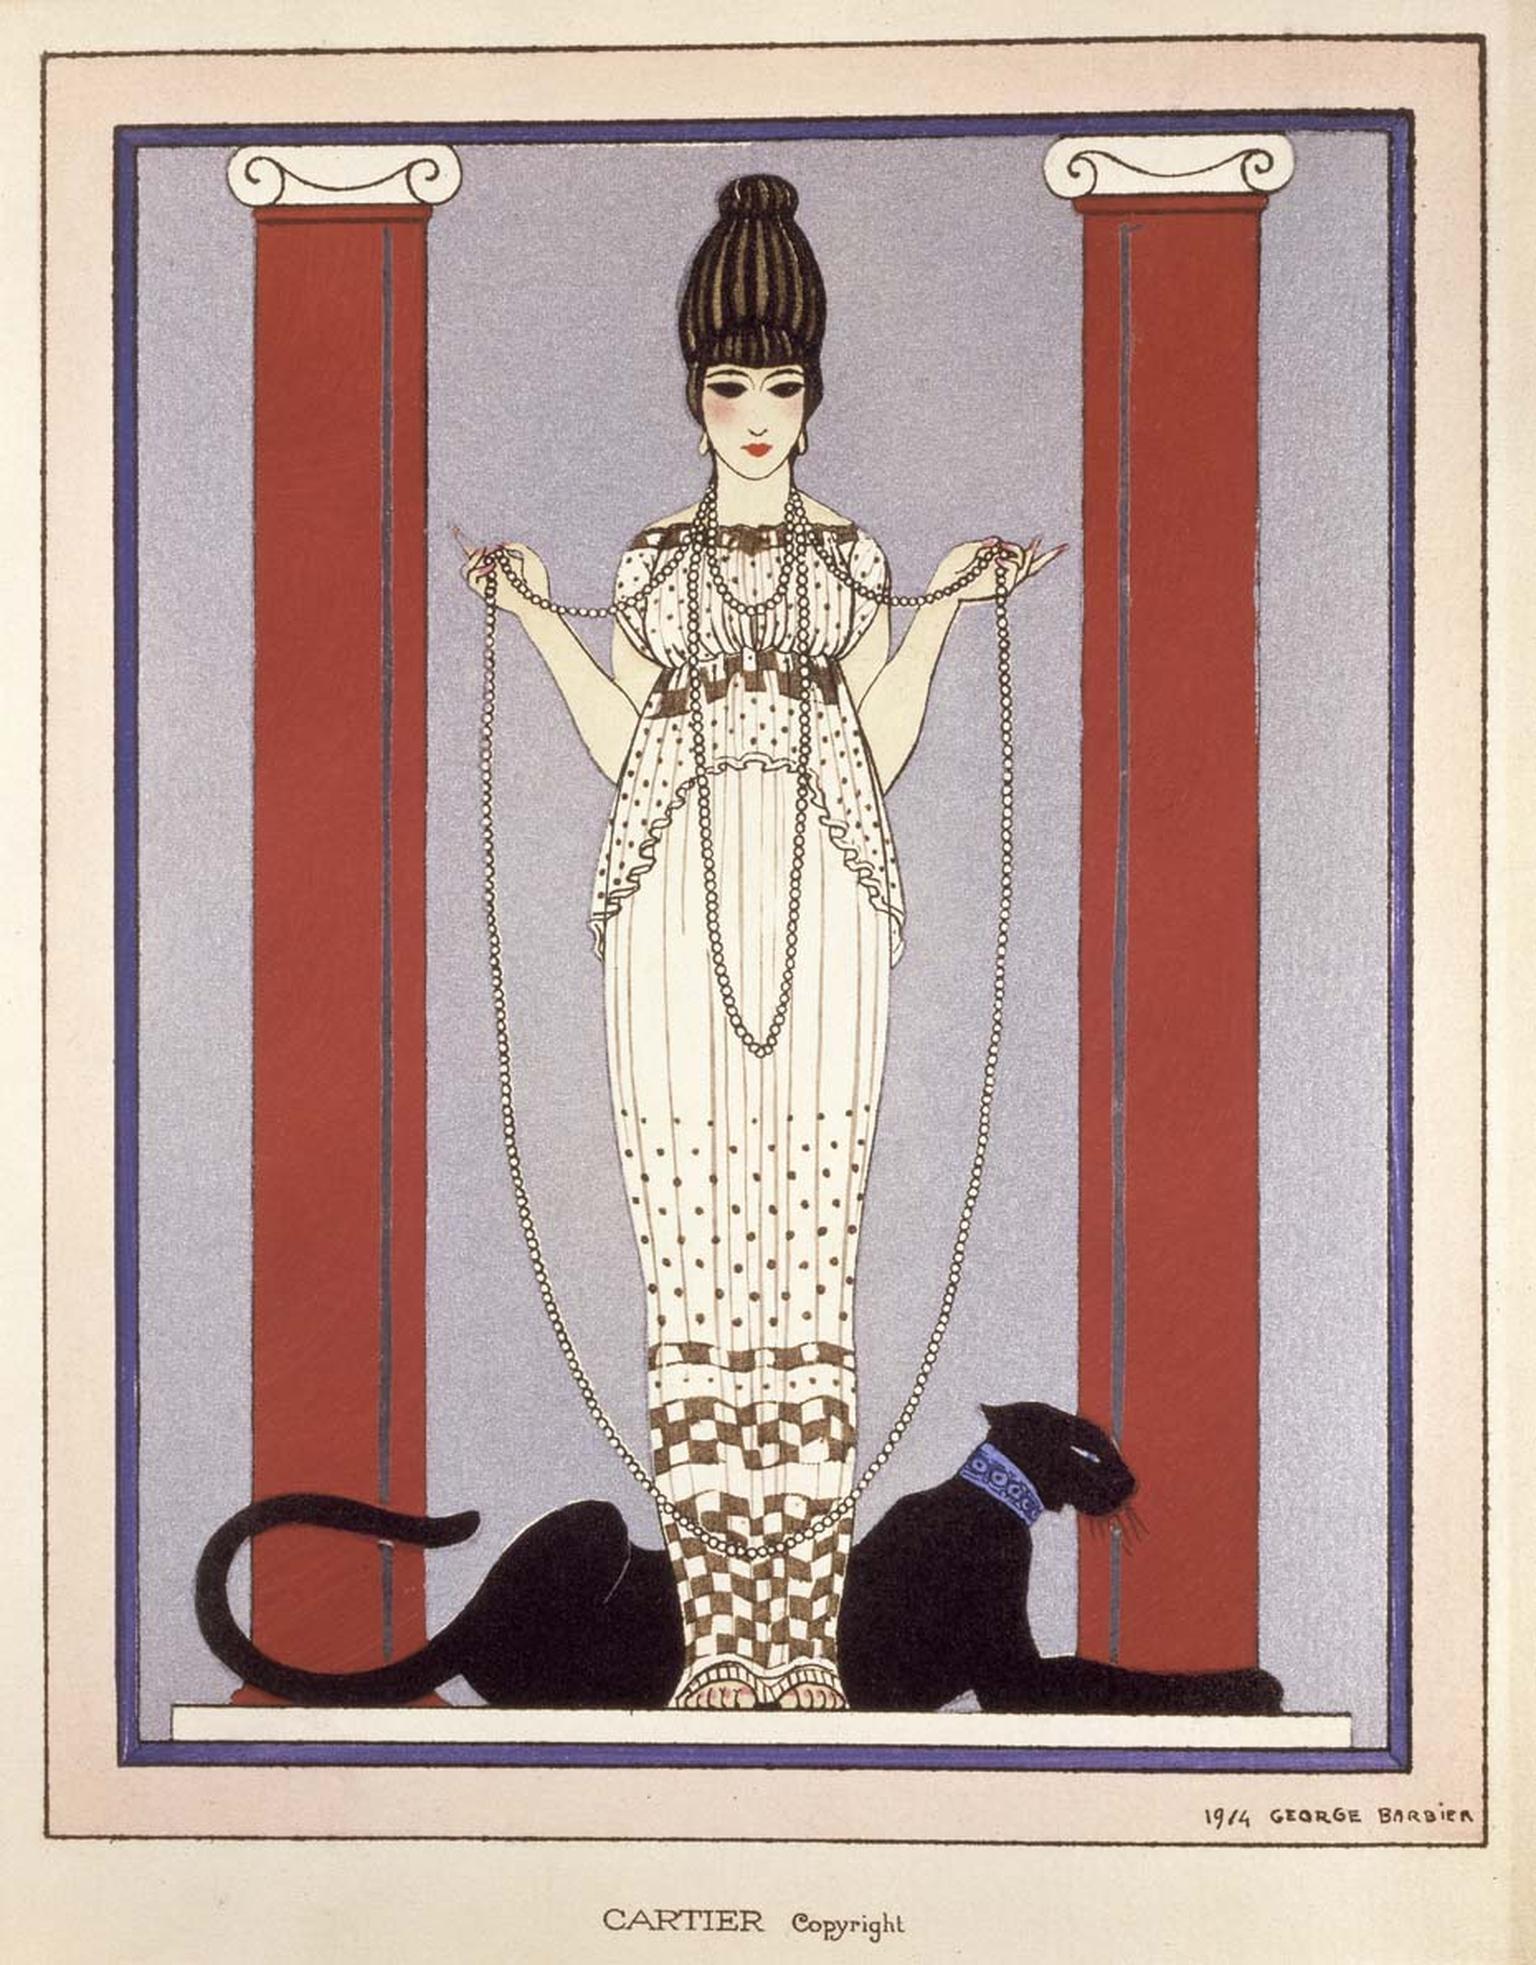 Cartier invitation card by Georges Barbier. The design was later used for advertising in the 1920s and depicts a woman in a Poiret gown with a black panther at her feet.